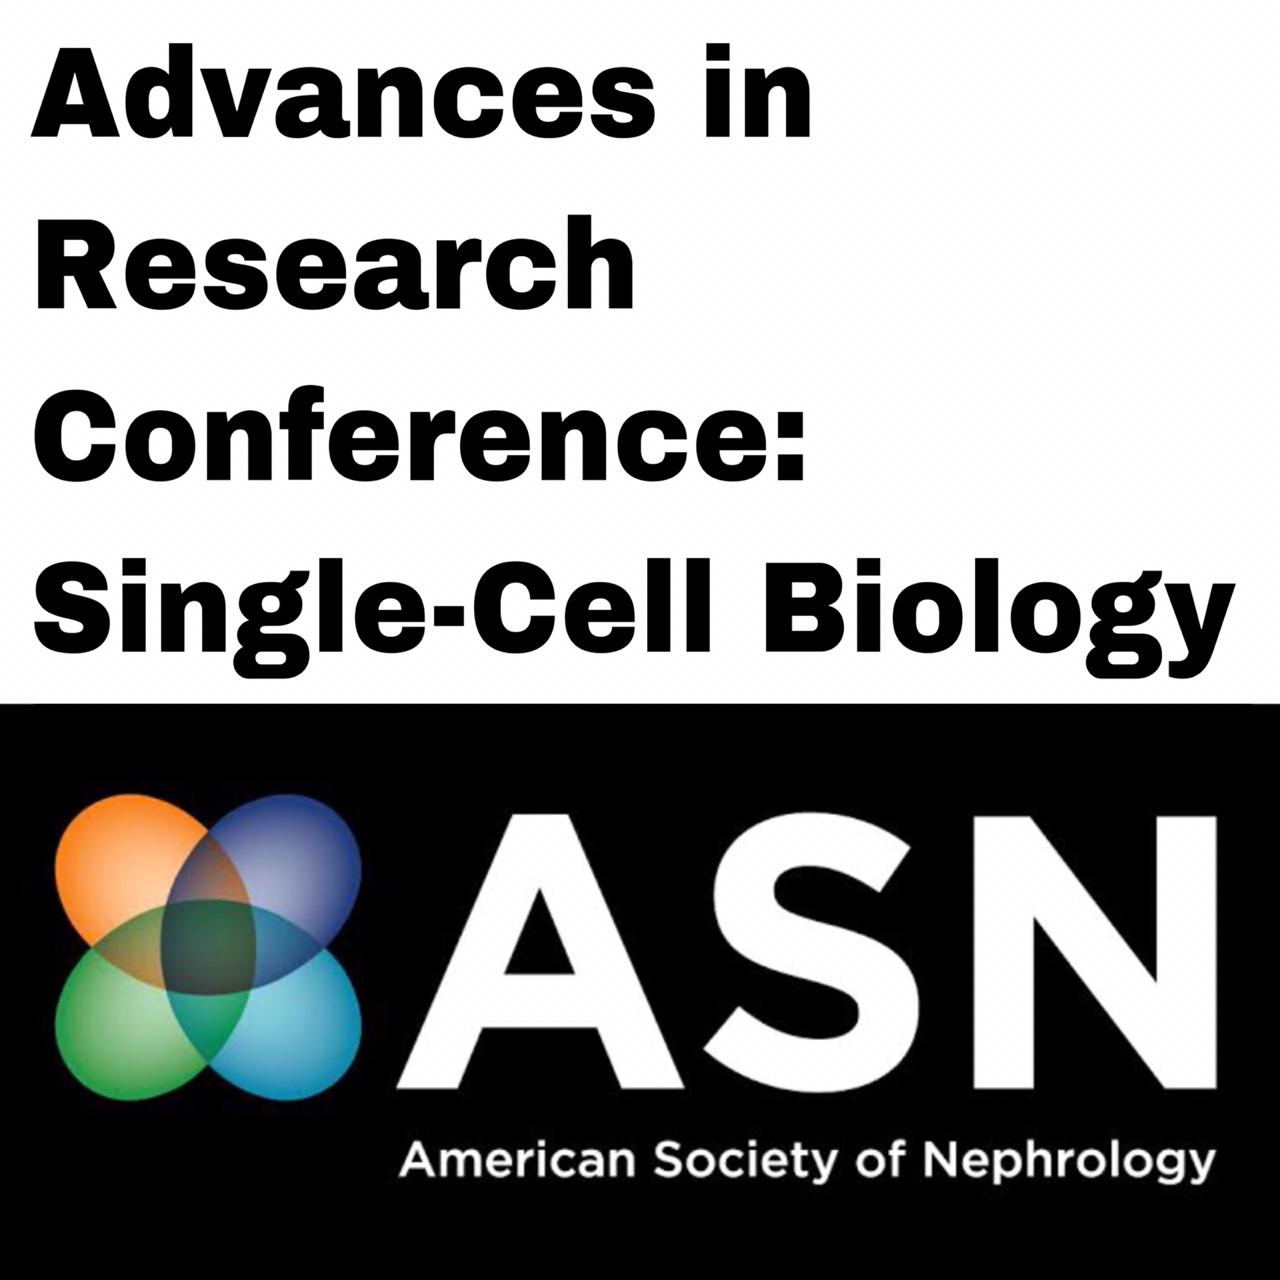 ASN Advances in Research Conference Single-Cell Biology (On-Demand) OCTOBER 2020 | Medical Video Courses.